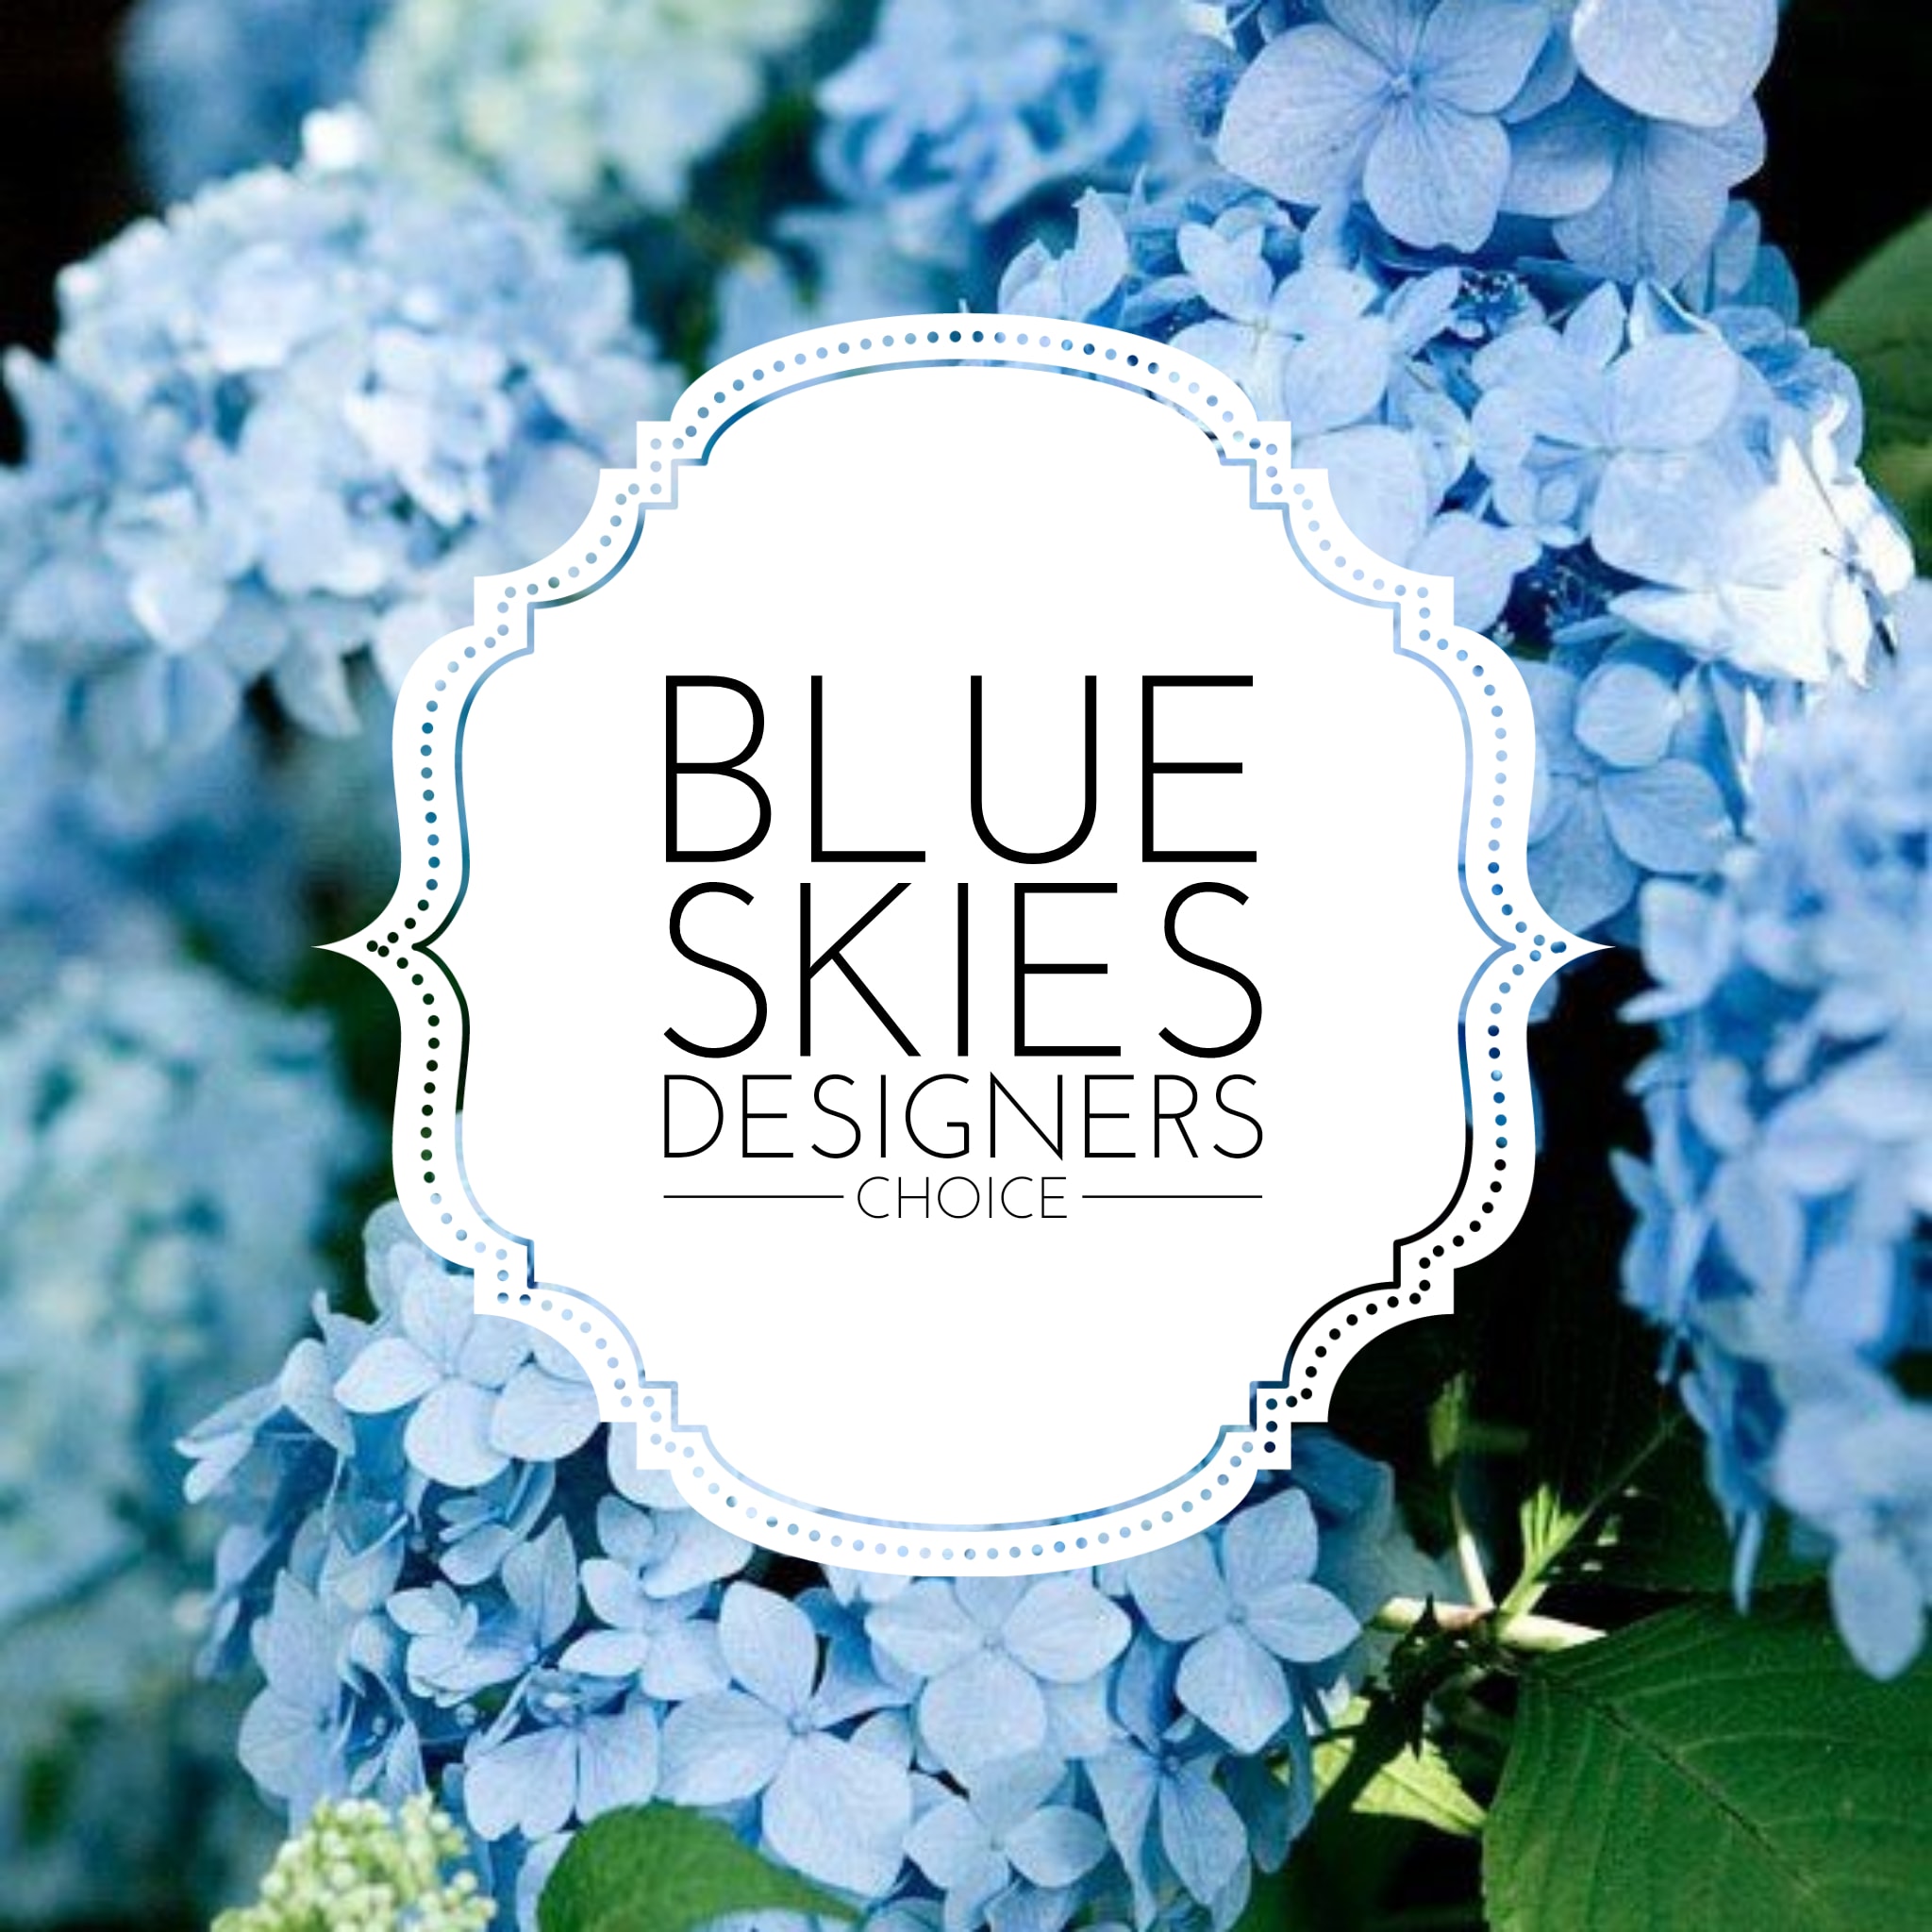 Blue Skies Designers Choice - Ever wanted to capture the blue sky in your home? Our blue skies designers choice arrangement will do just that. Let us bring that big blue sky into you or a loved ones home. Our florists use only the most beautiful and freshest blooms to create a bouquet for you.   